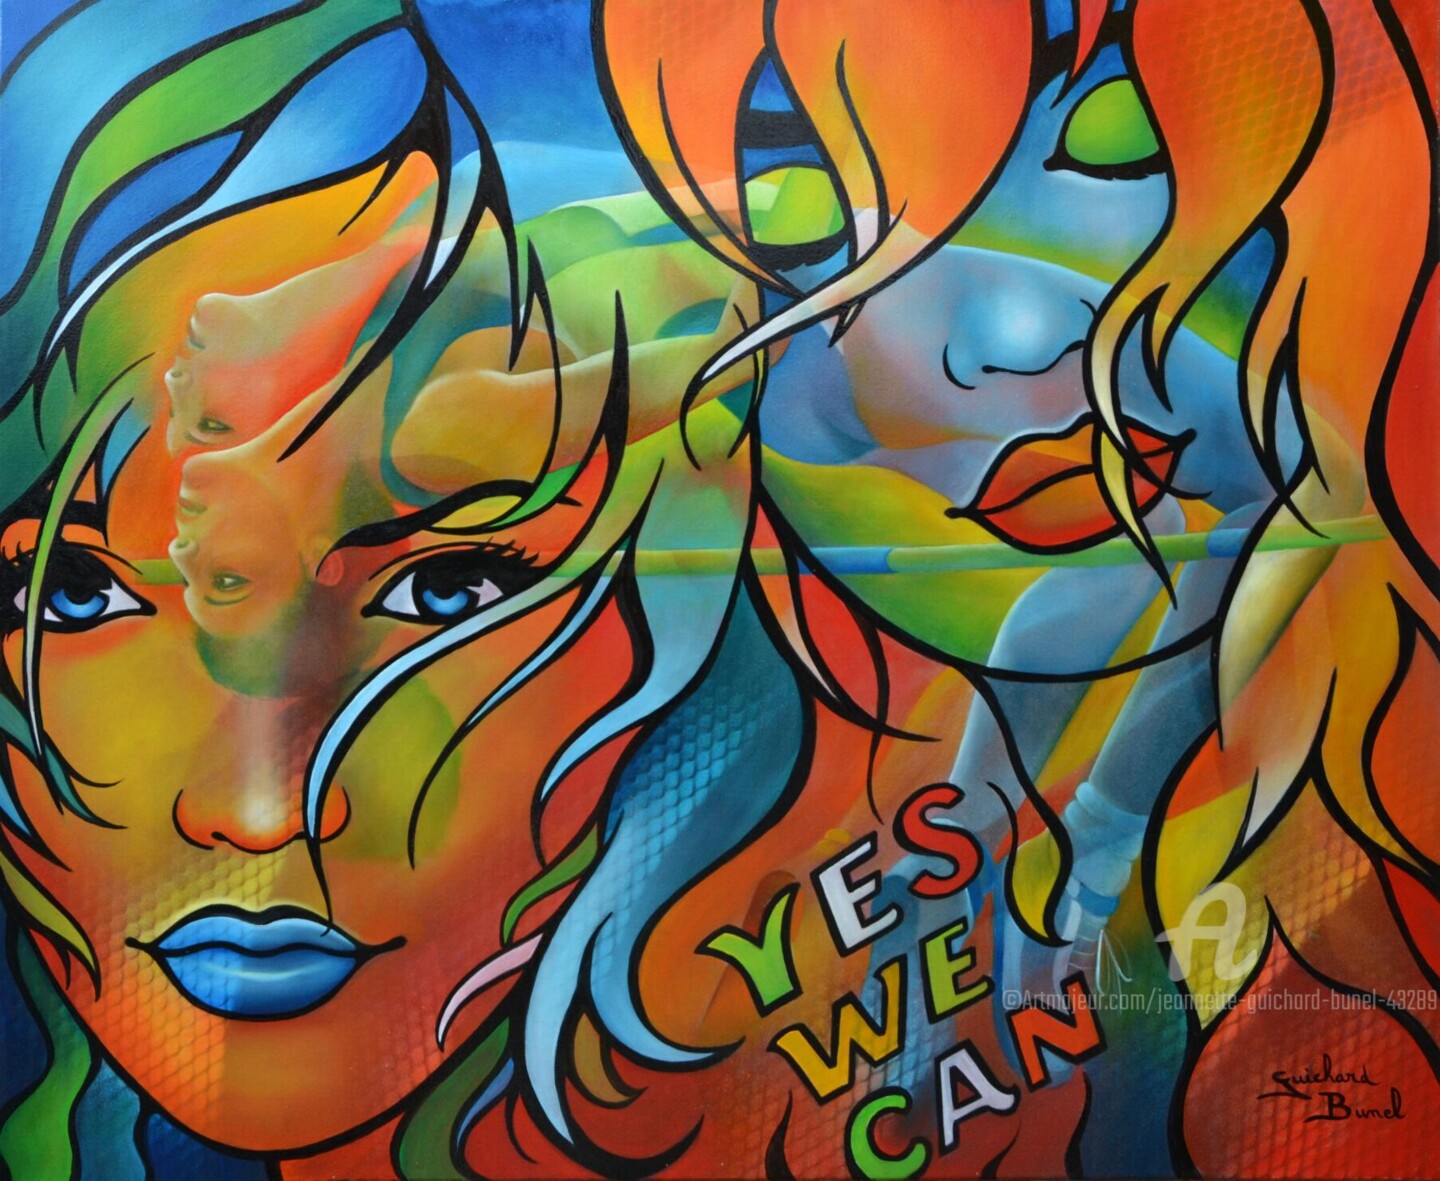 Jeannette Guichard-Bunel - yes we can!